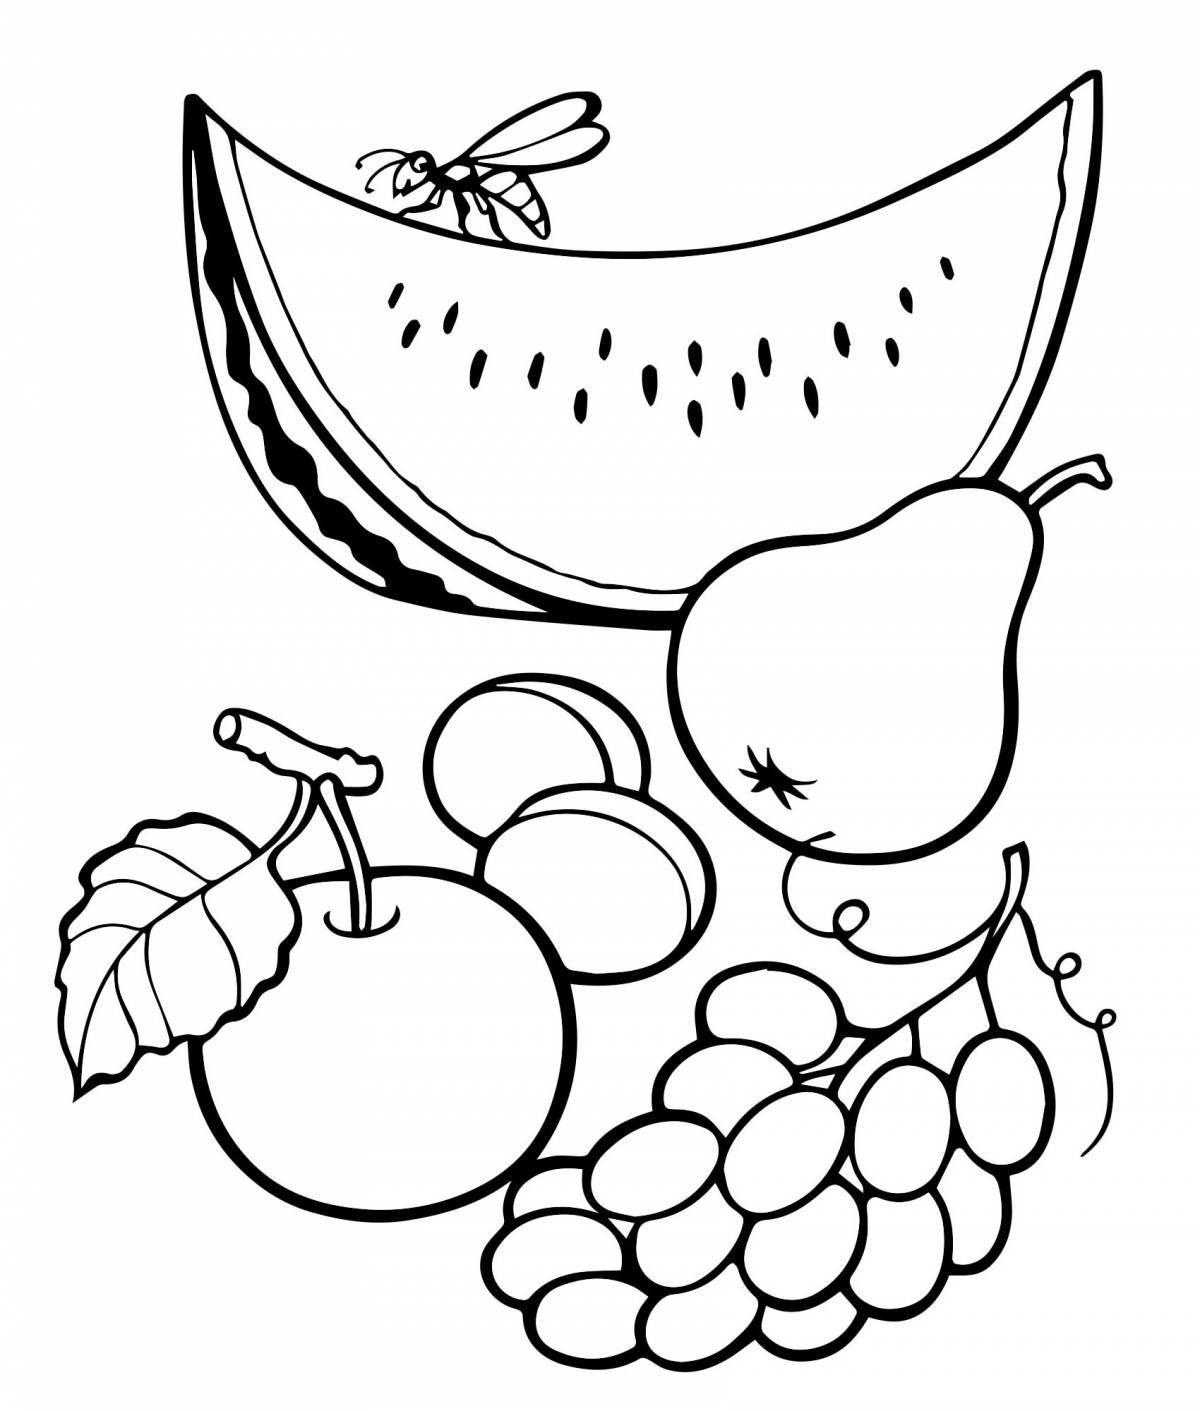 Fun fruit coloring book for 6-7 year olds